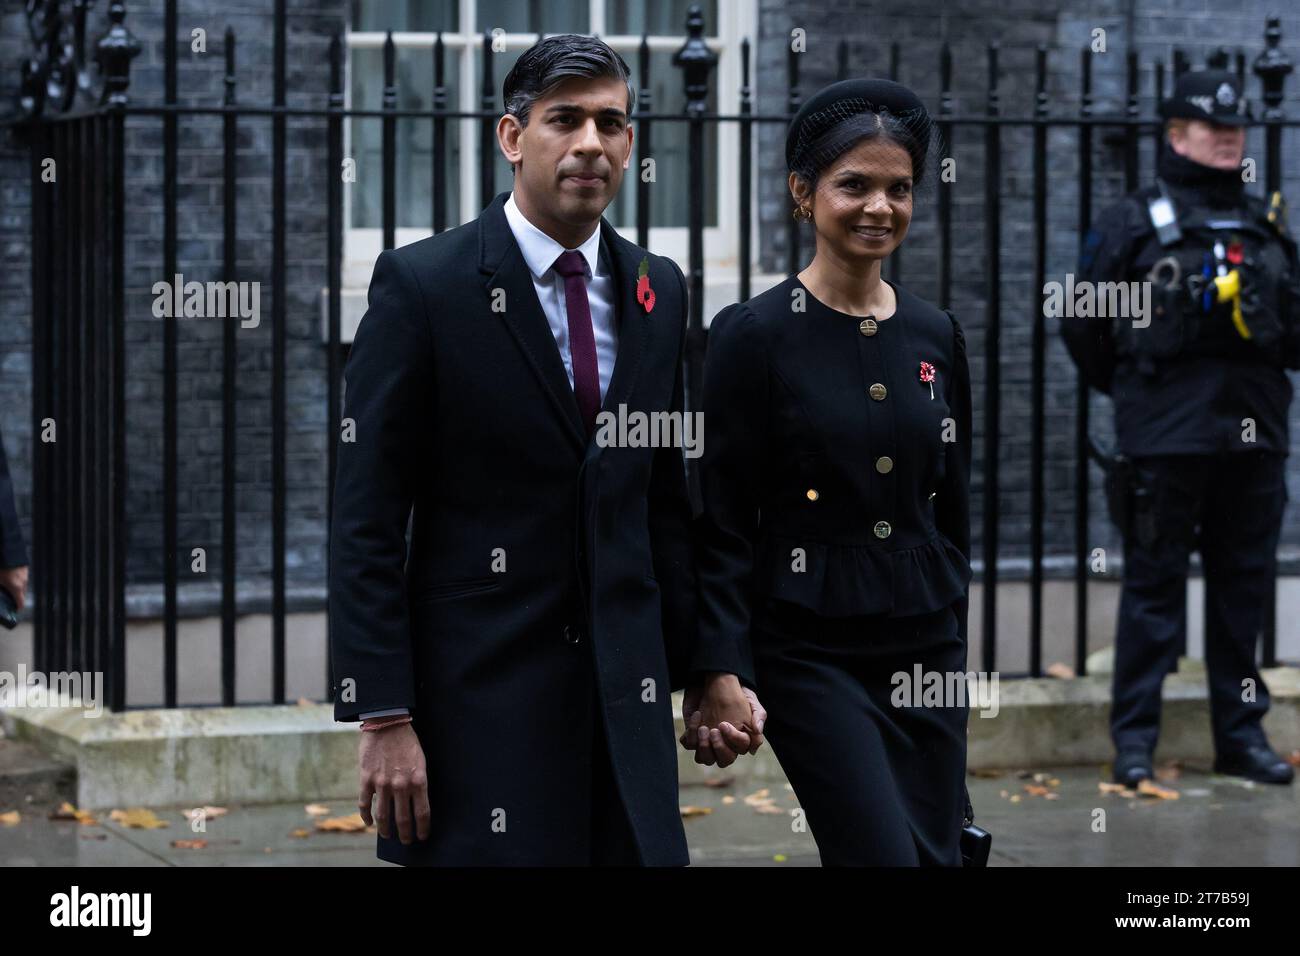 Rishi Sunak and Akshata Murthy walk through Whitehall to attend the Remembrance Sunday Service at the Cenotaph in London. Politicians and public figures walk through Whitehall to attend the Remembrance Sunday Service at the Cenotaph in London. Stock Photo